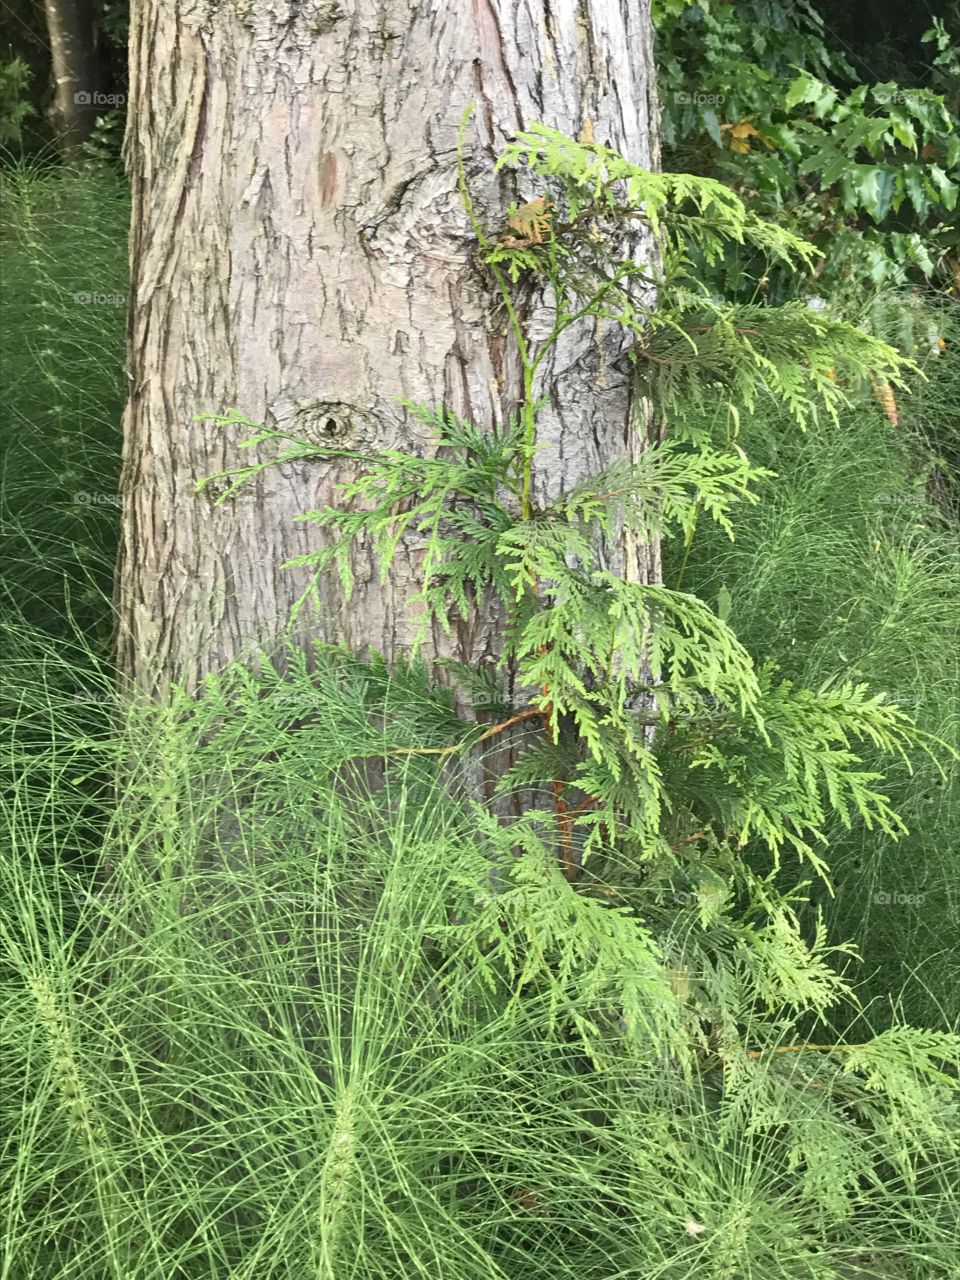 I love the ferns growing out of this tree along with the plants surrounding it.